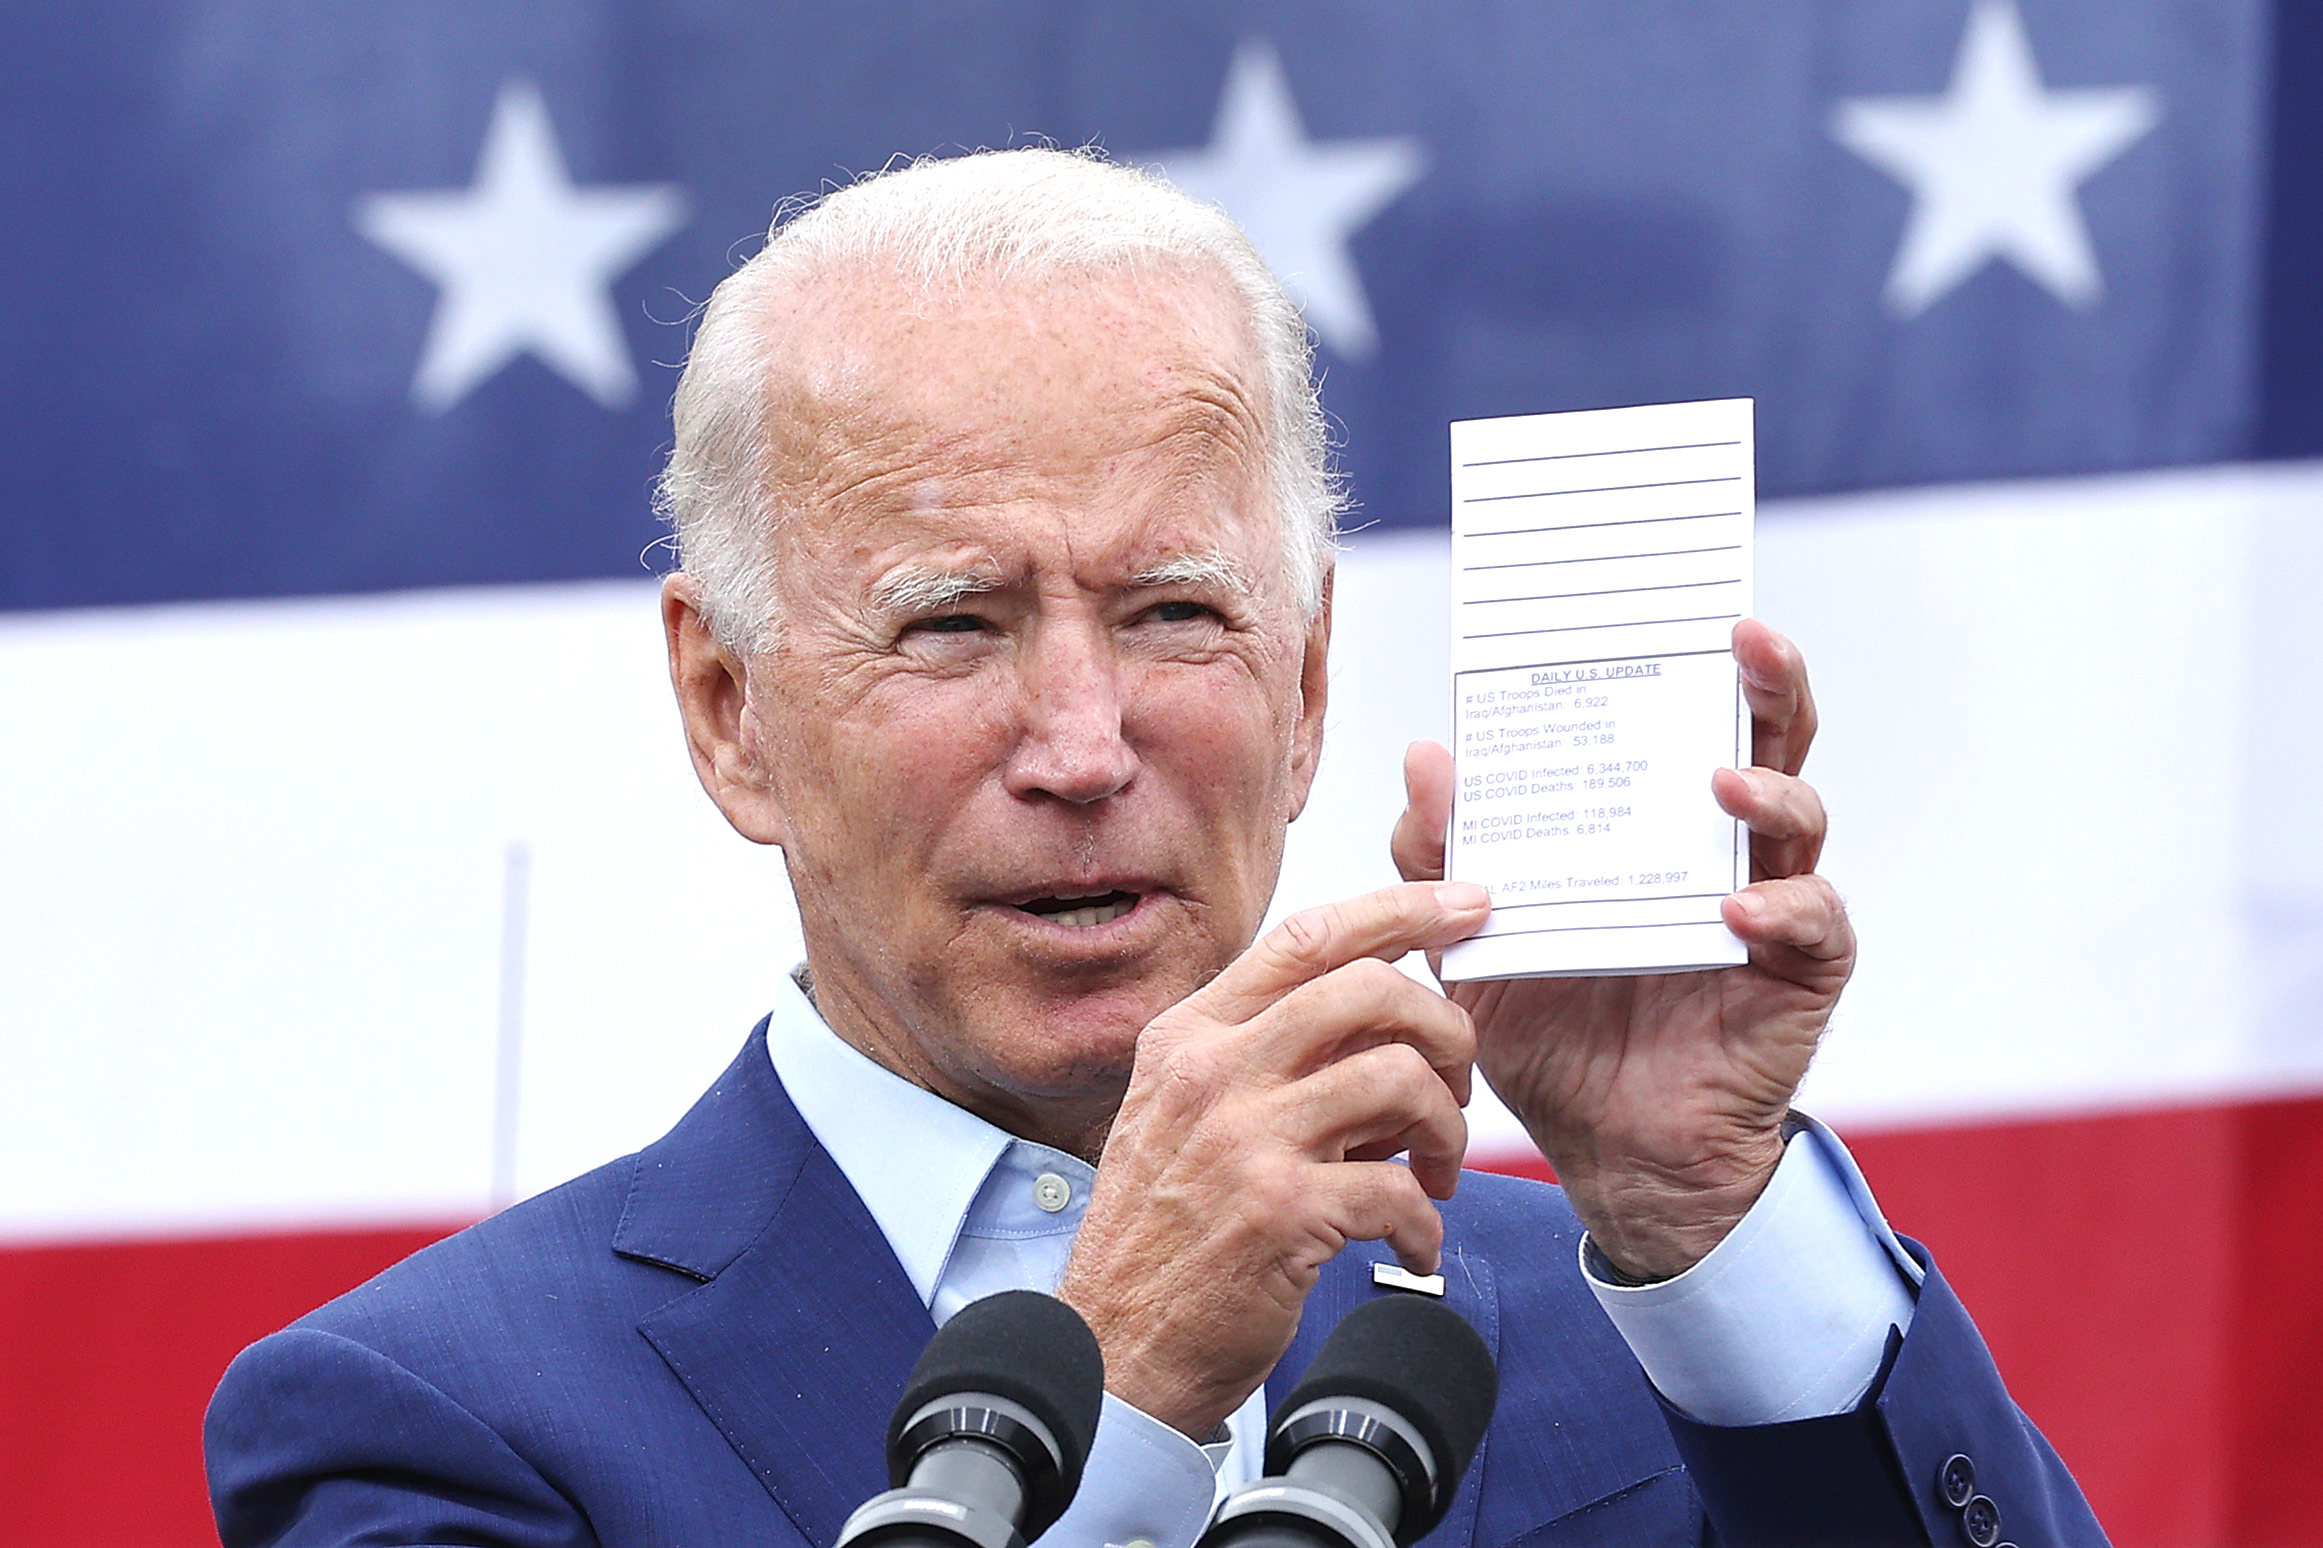 PHOTO: Democratic presidential candidate former Vice President Joe Biden displays a card he carries showing daily updates on American troop casualties and coronavirus infections at UAW Region 1 headquarters in Warren, Mich., Sept. 9, 2020.